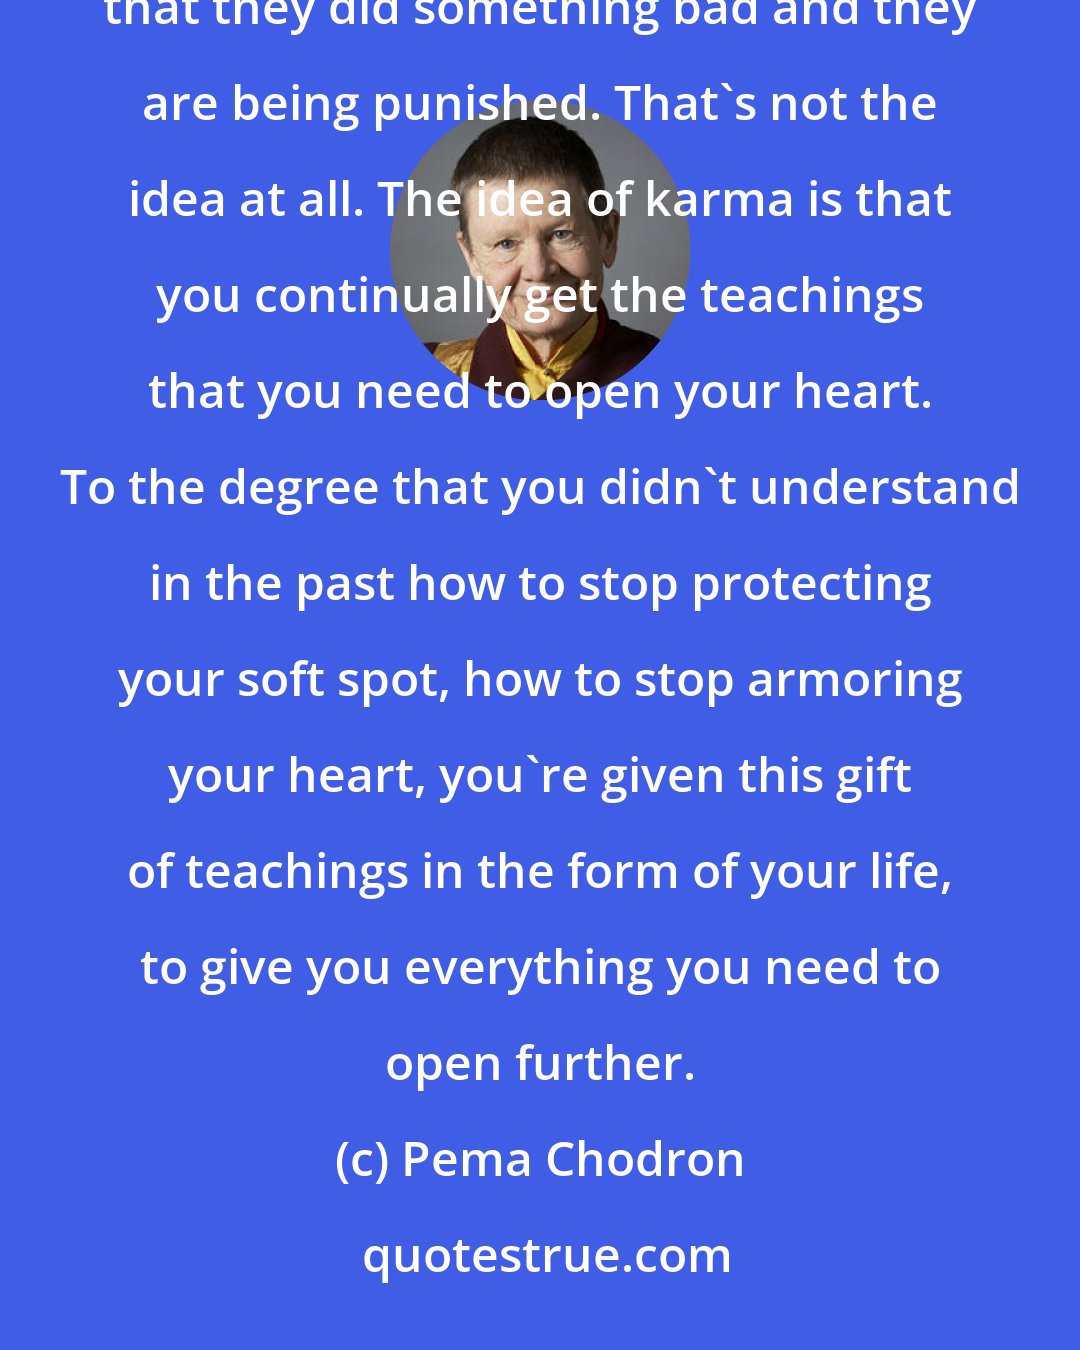 Pema Chodron: People get into a heavy-duty sin and guilt trip, feeling that if things are going wrong, that means that they did something bad and they are being punished. That's not the idea at all. The idea of karma is that you continually get the teachings that you need to open your heart. To the degree that you didn't understand in the past how to stop protecting your soft spot, how to stop armoring your heart, you're given this gift of teachings in the form of your life, to give you everything you need to open further.